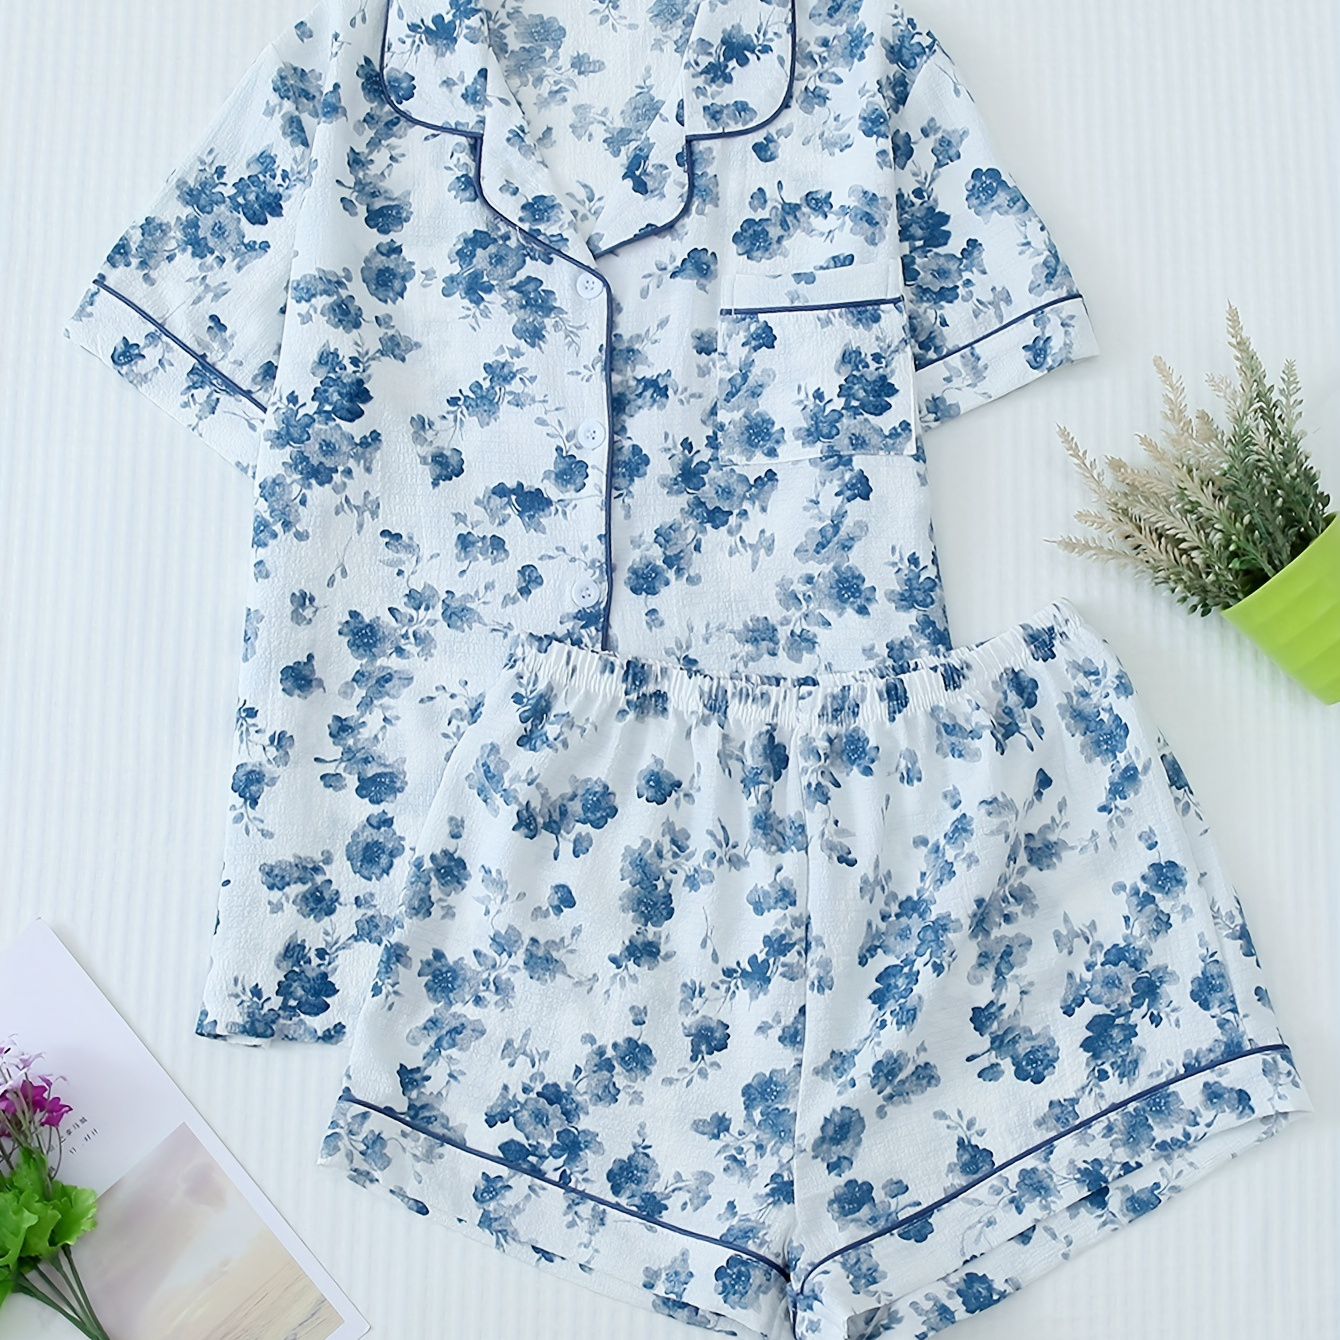 

Women's Ink Floral Print Casual Pajama Set, Short Sleeve Buttons Lapel Top & Shorts, Comfortable Relaxed Fit, Summer Nightwear